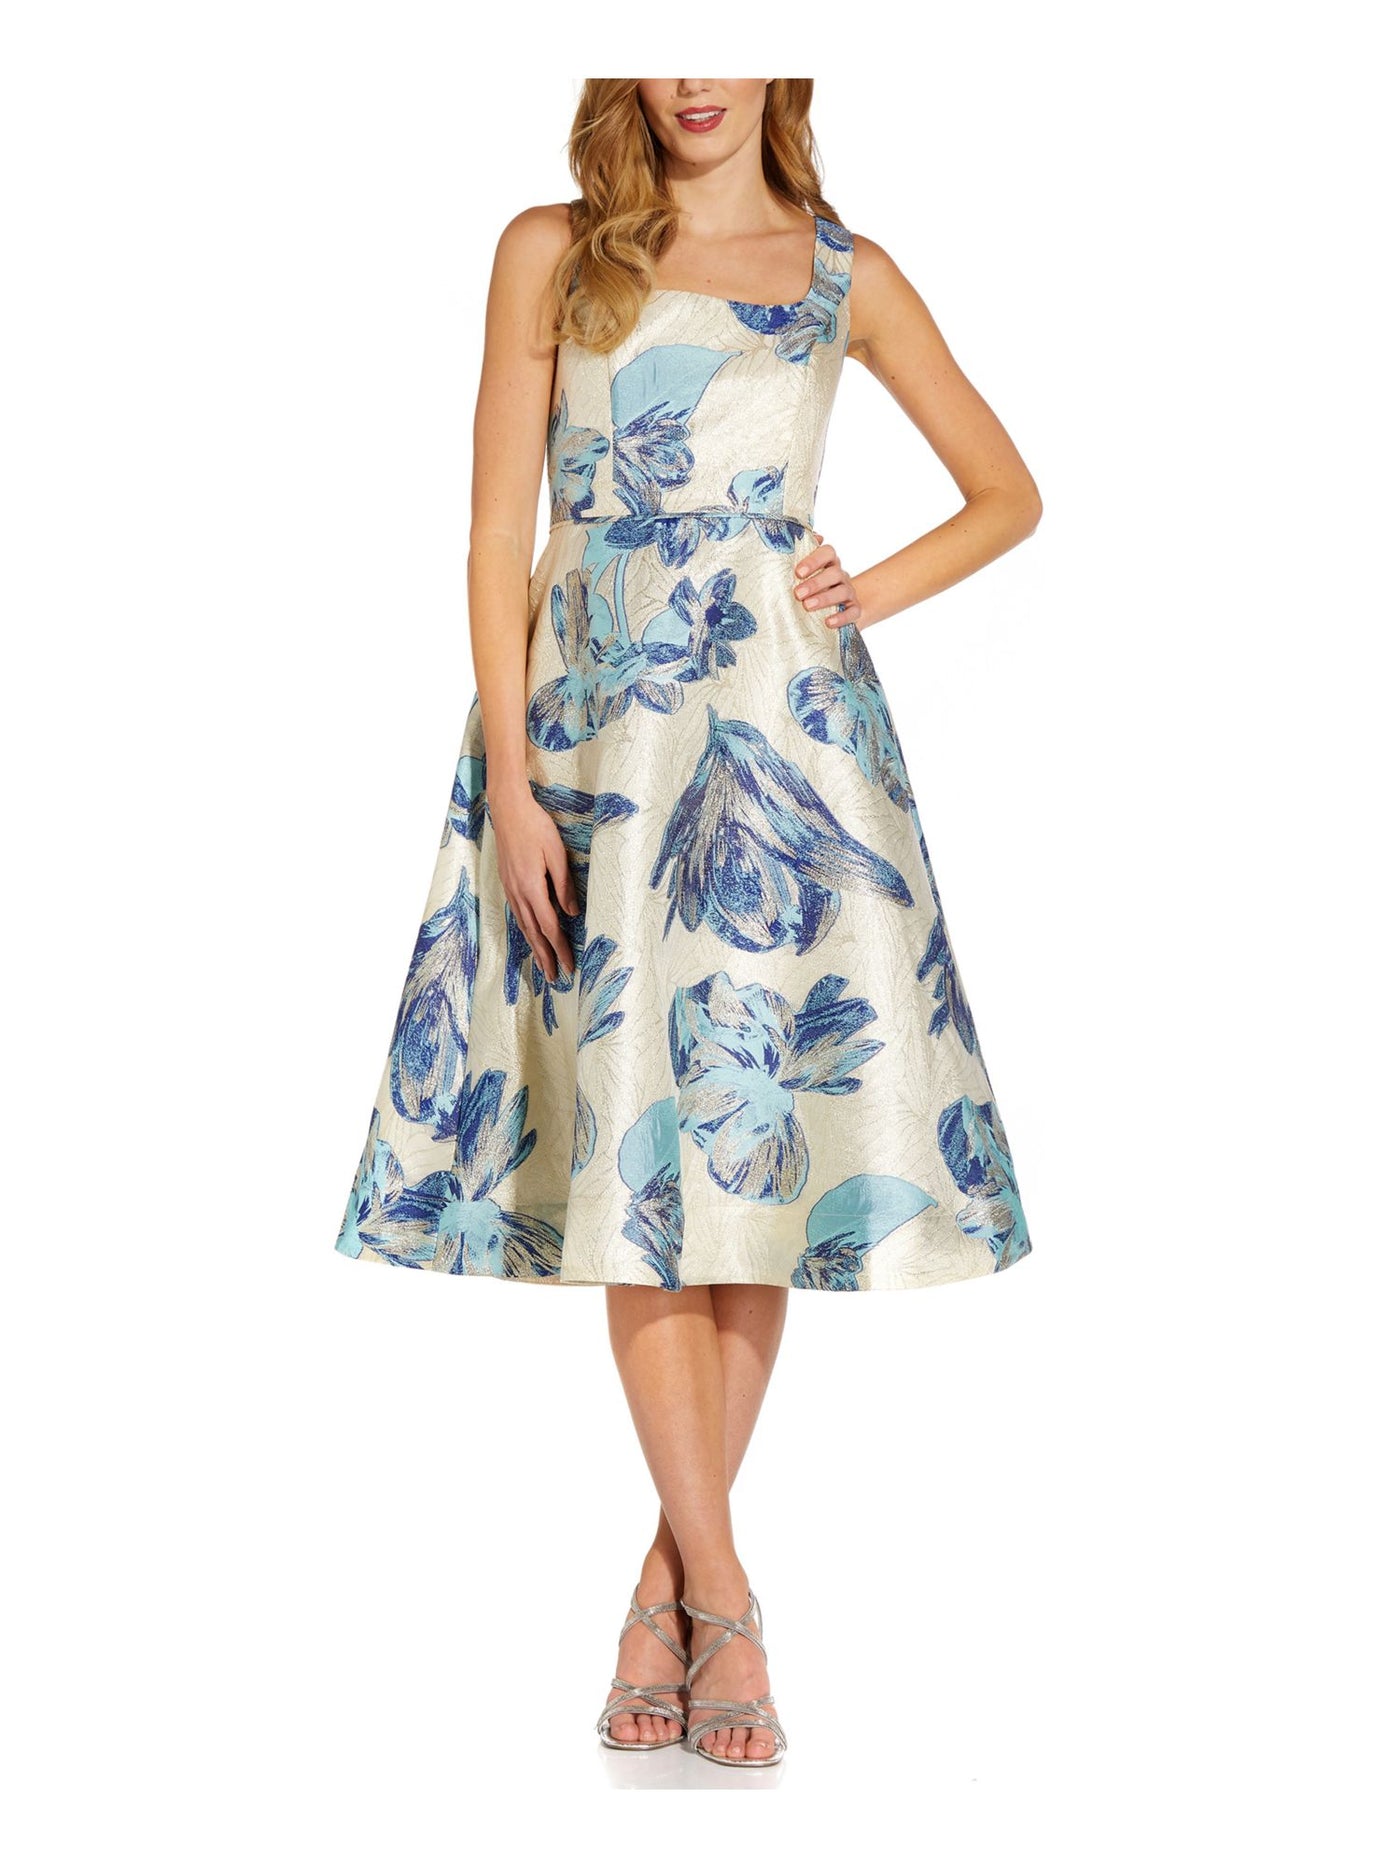 ADRIANNA PAPELL Womens Blue Metallic Zippered Lined Floral Sleeveless Square Neck Below The Knee Cocktail Fit + Flare Dress 4